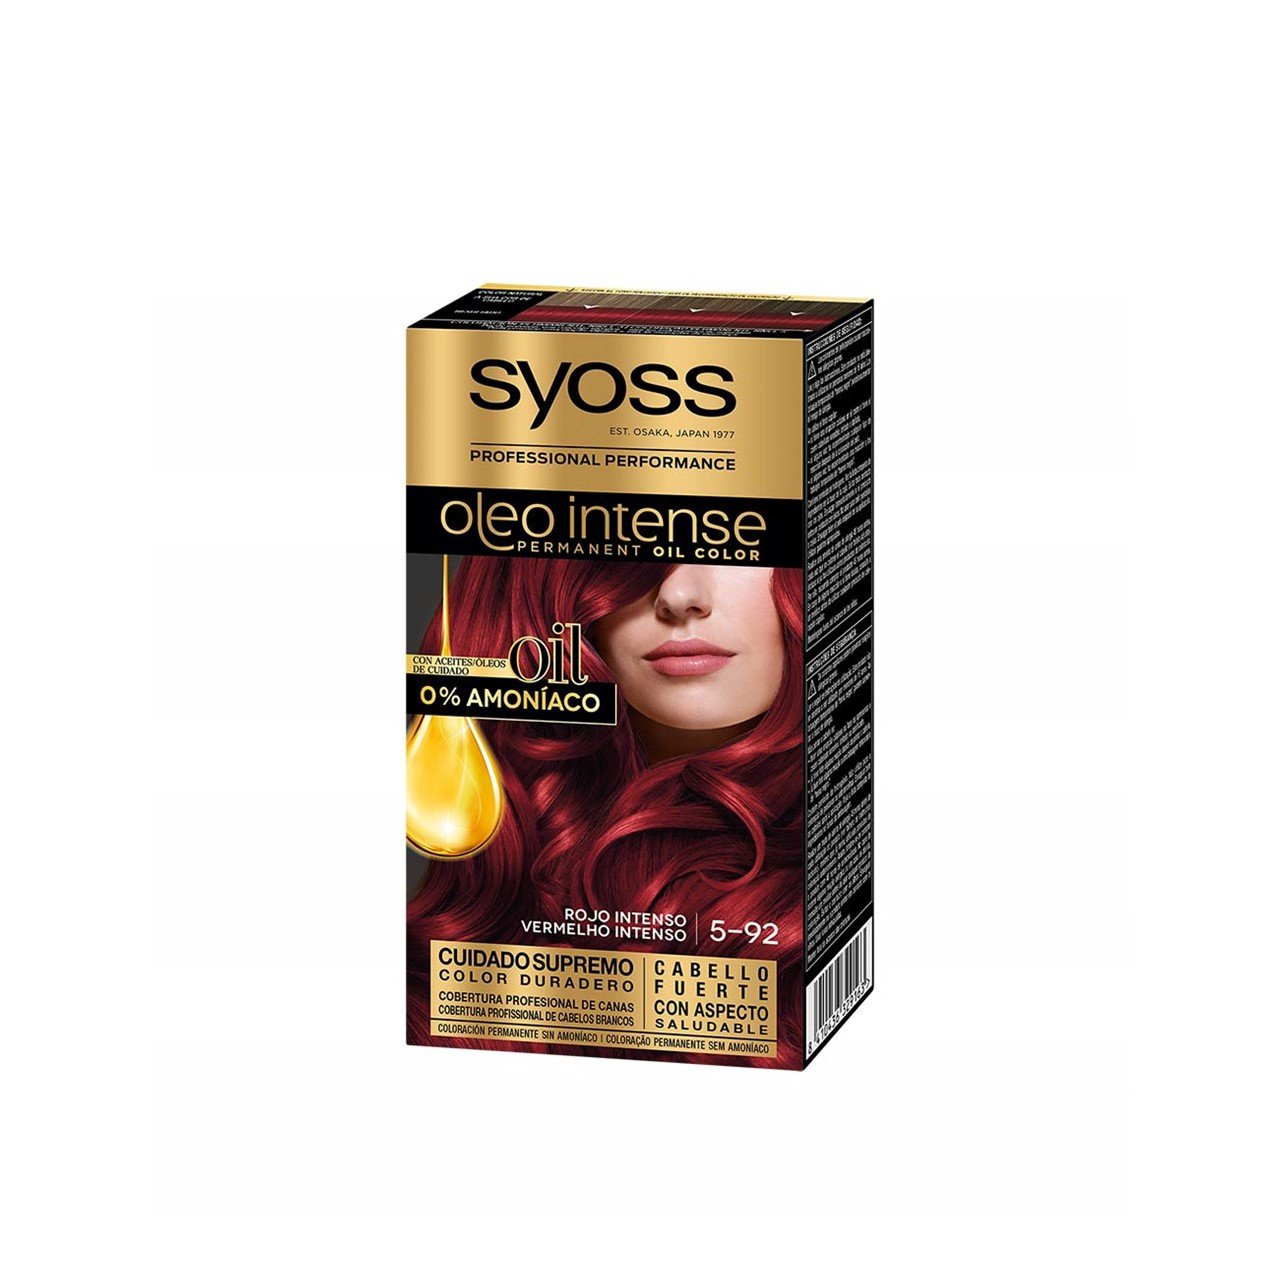 Syoss Oleo Intense Permanent Oil Color 5-92 Bright Red Permanent Hair Dye